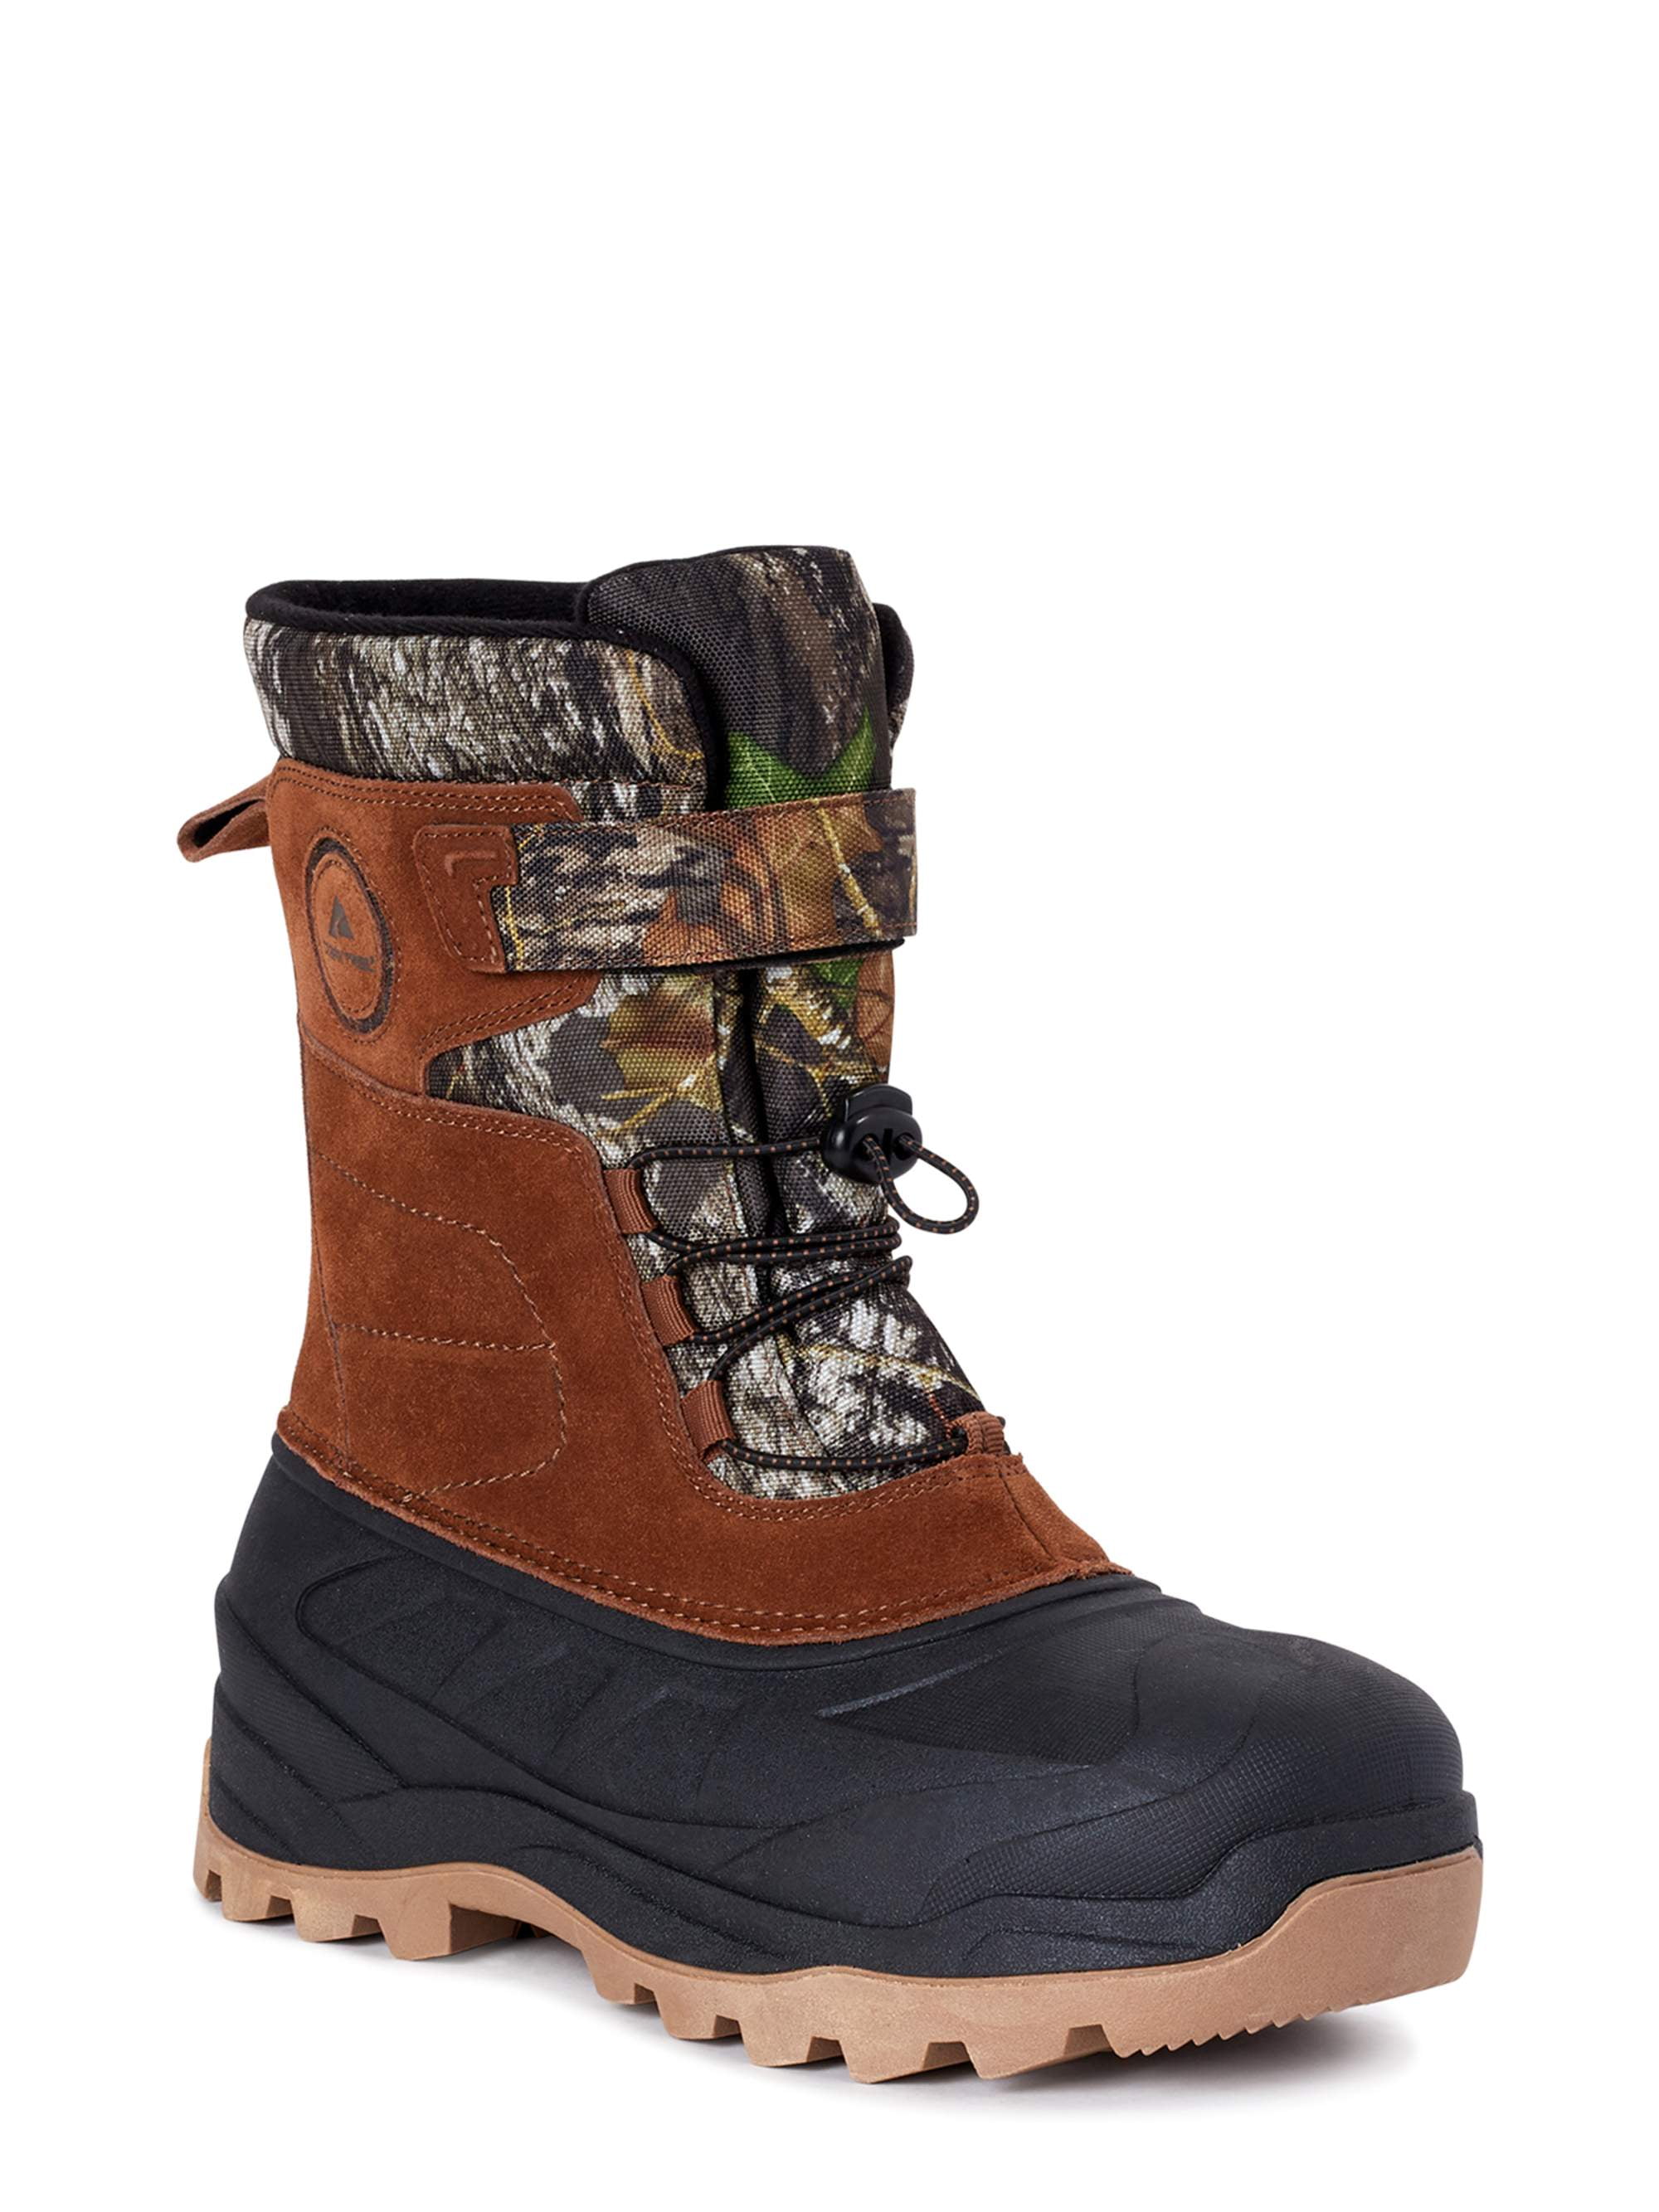 New Men's Winter Snow Boots Camouflage Waterproof Insulated Hunting Thermolite 